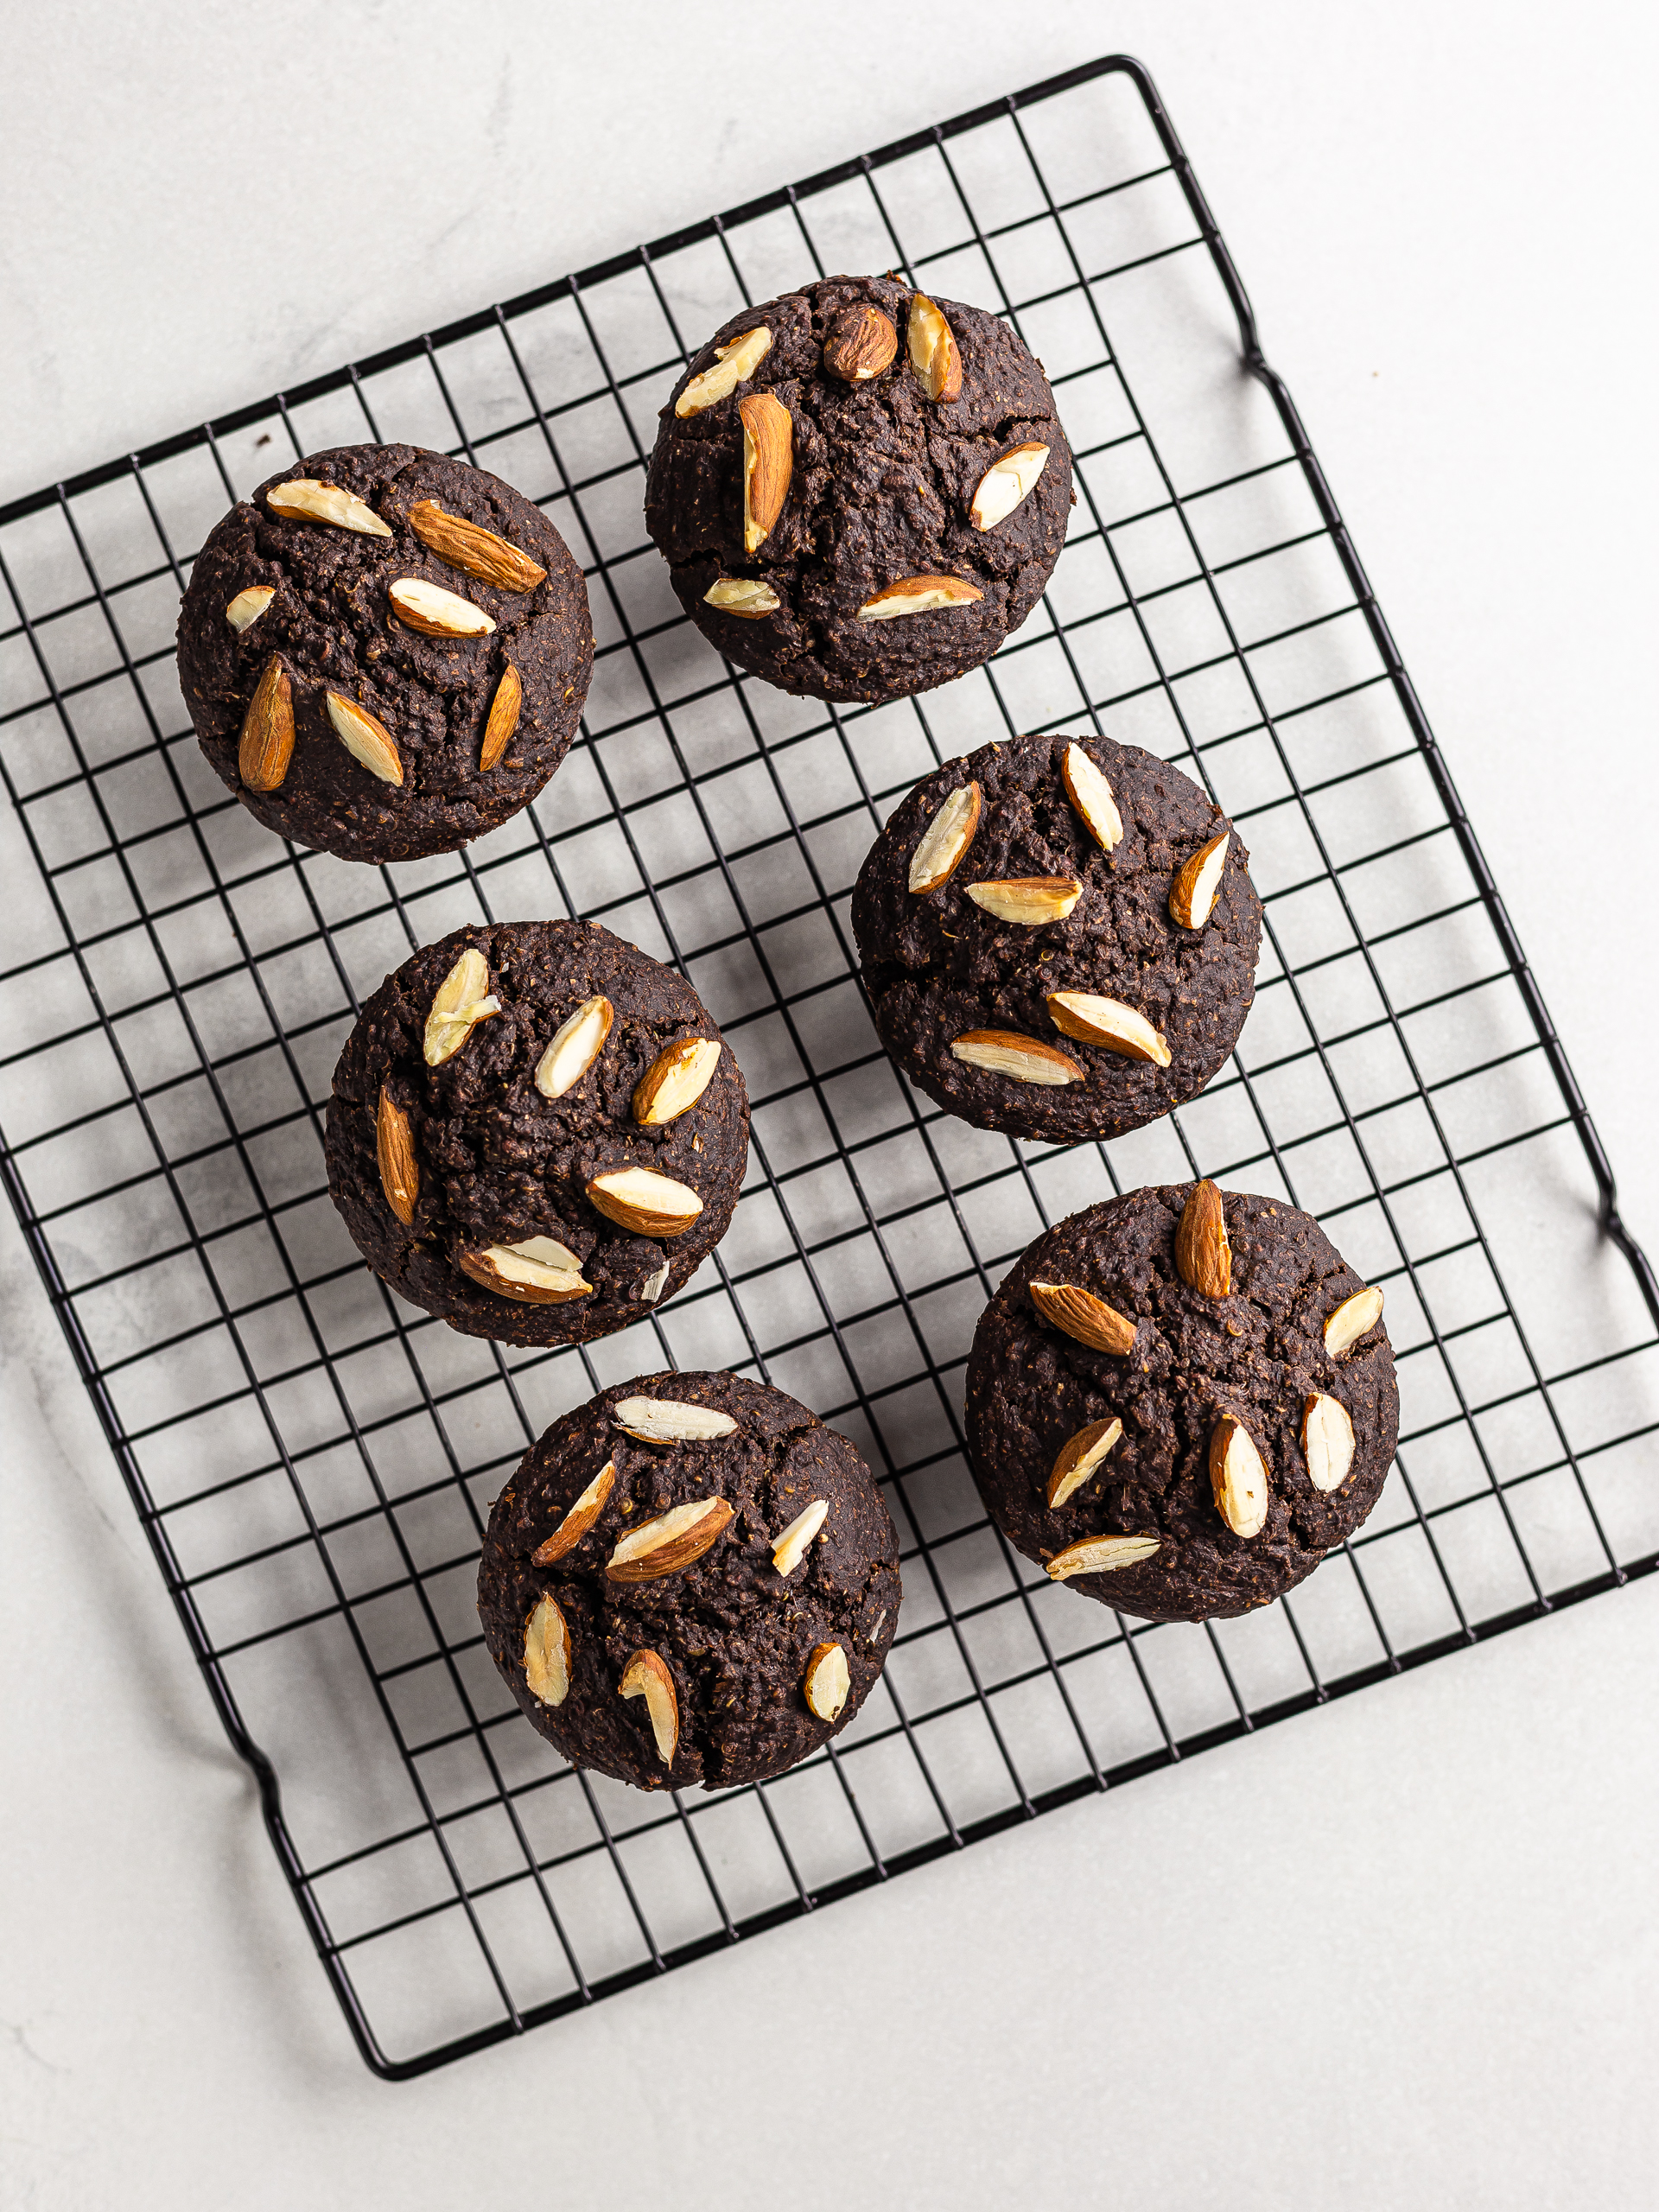 baked chocolate quinoa muffins on a rack